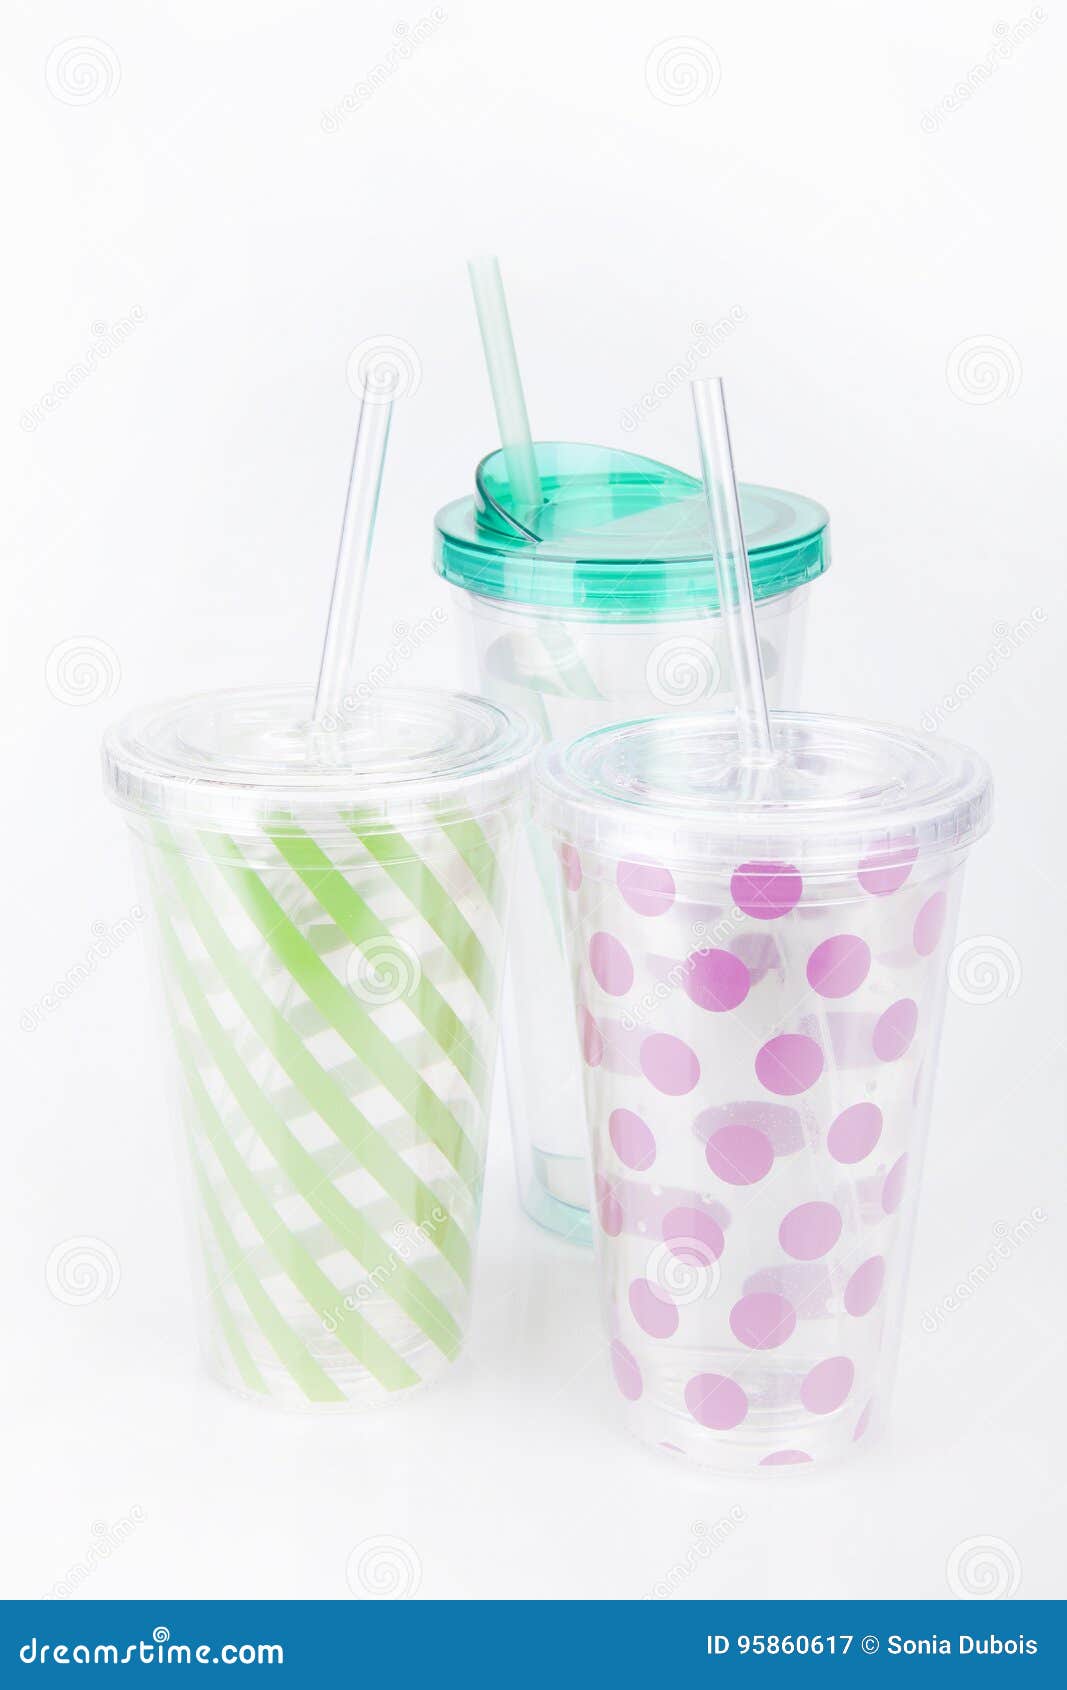 https://thumbs.dreamstime.com/z/green-pink-plastic-tumblers-white-surface-isolated-white-background-95860617.jpg